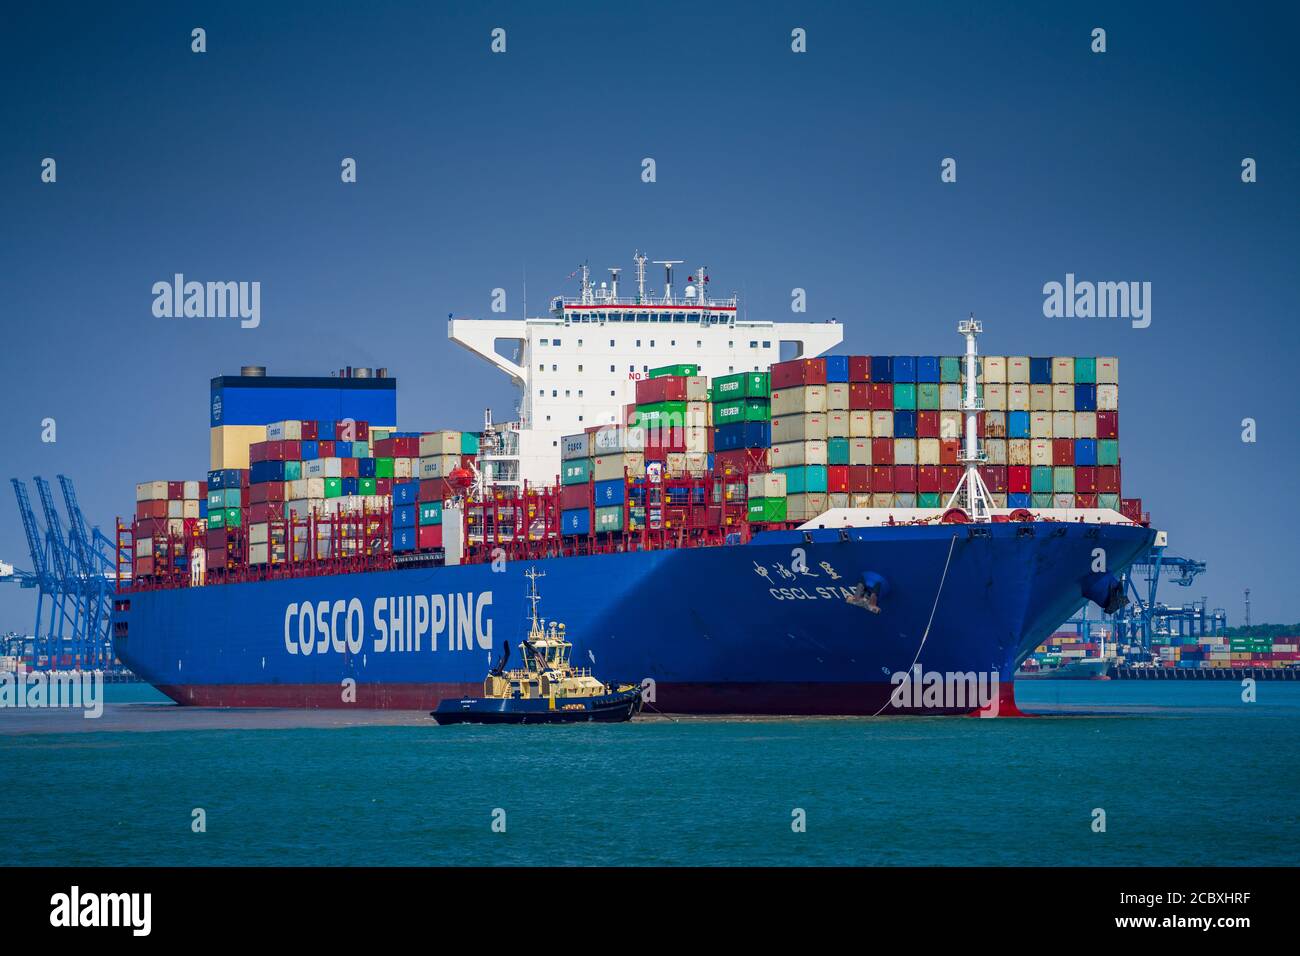 Cosco Shipping Star Container Ship enters Felixstowe Port - The Cosco Shipping vessel CSCL Star approaches the docks at Felixstowe Port, in the UK Stock Photo